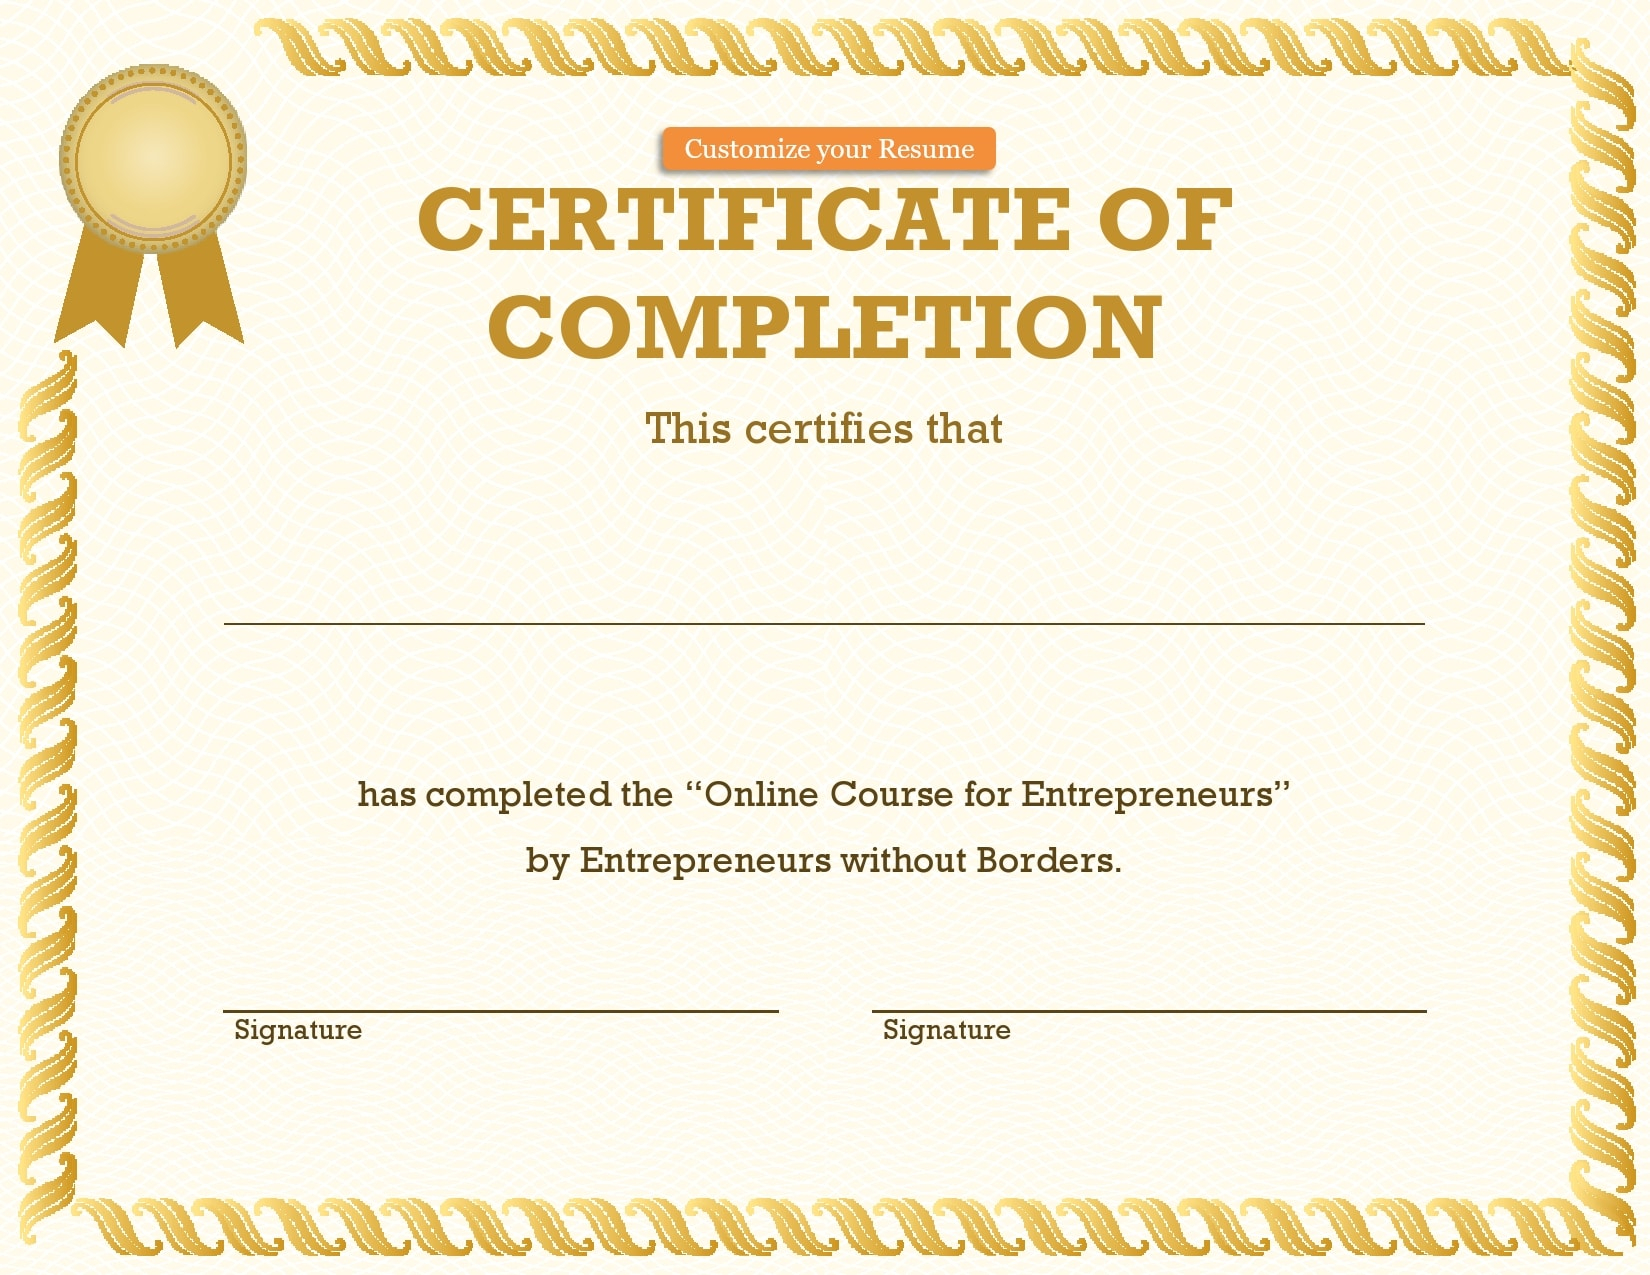 10 Great Certificate of Completion Templates (10% FREE) Intended For Free Completion Certificate Templates For Word